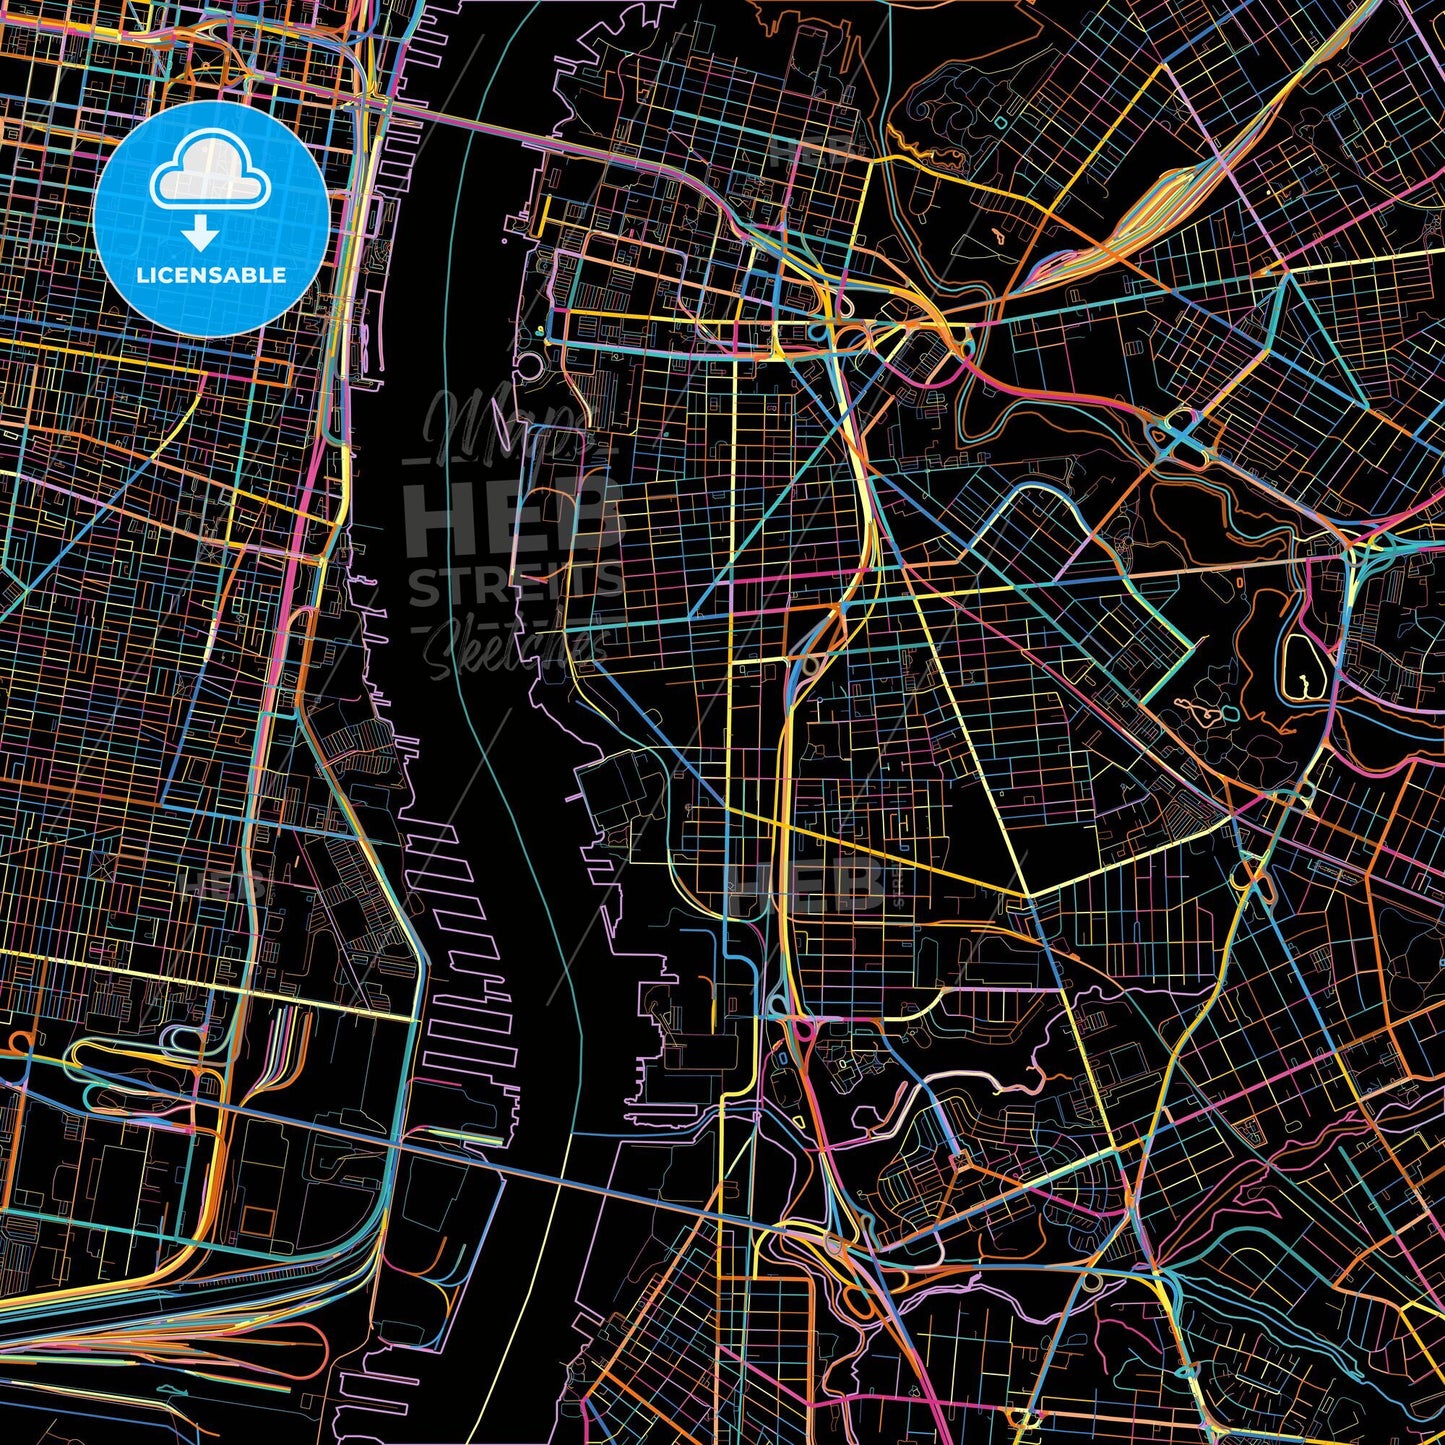 Camden, New Jersey, United States, colorful city map on black background